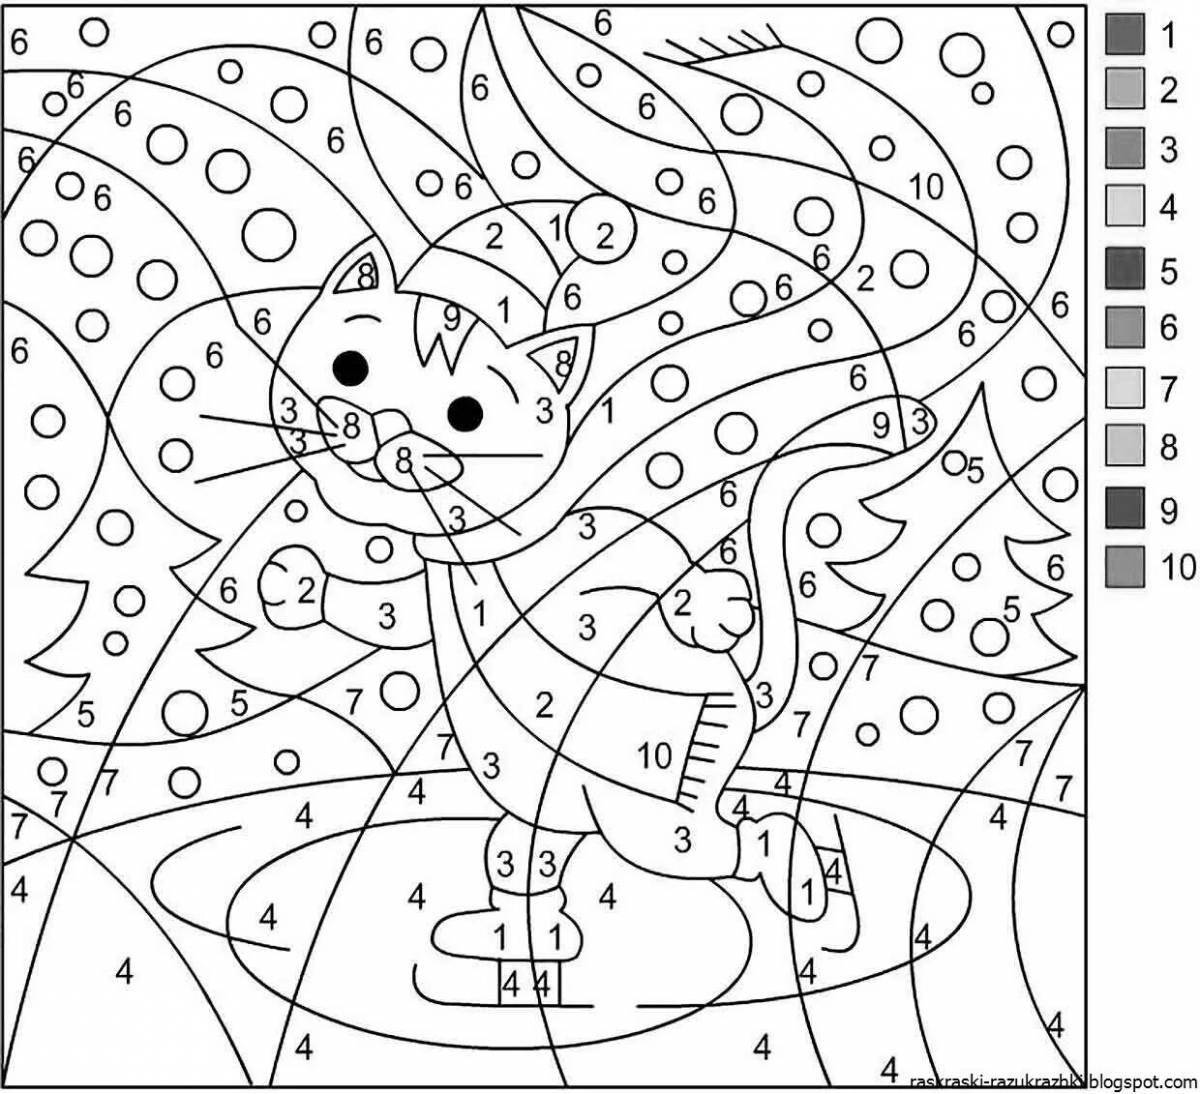 Color-frenzy coloring page for boys and girls aged 7